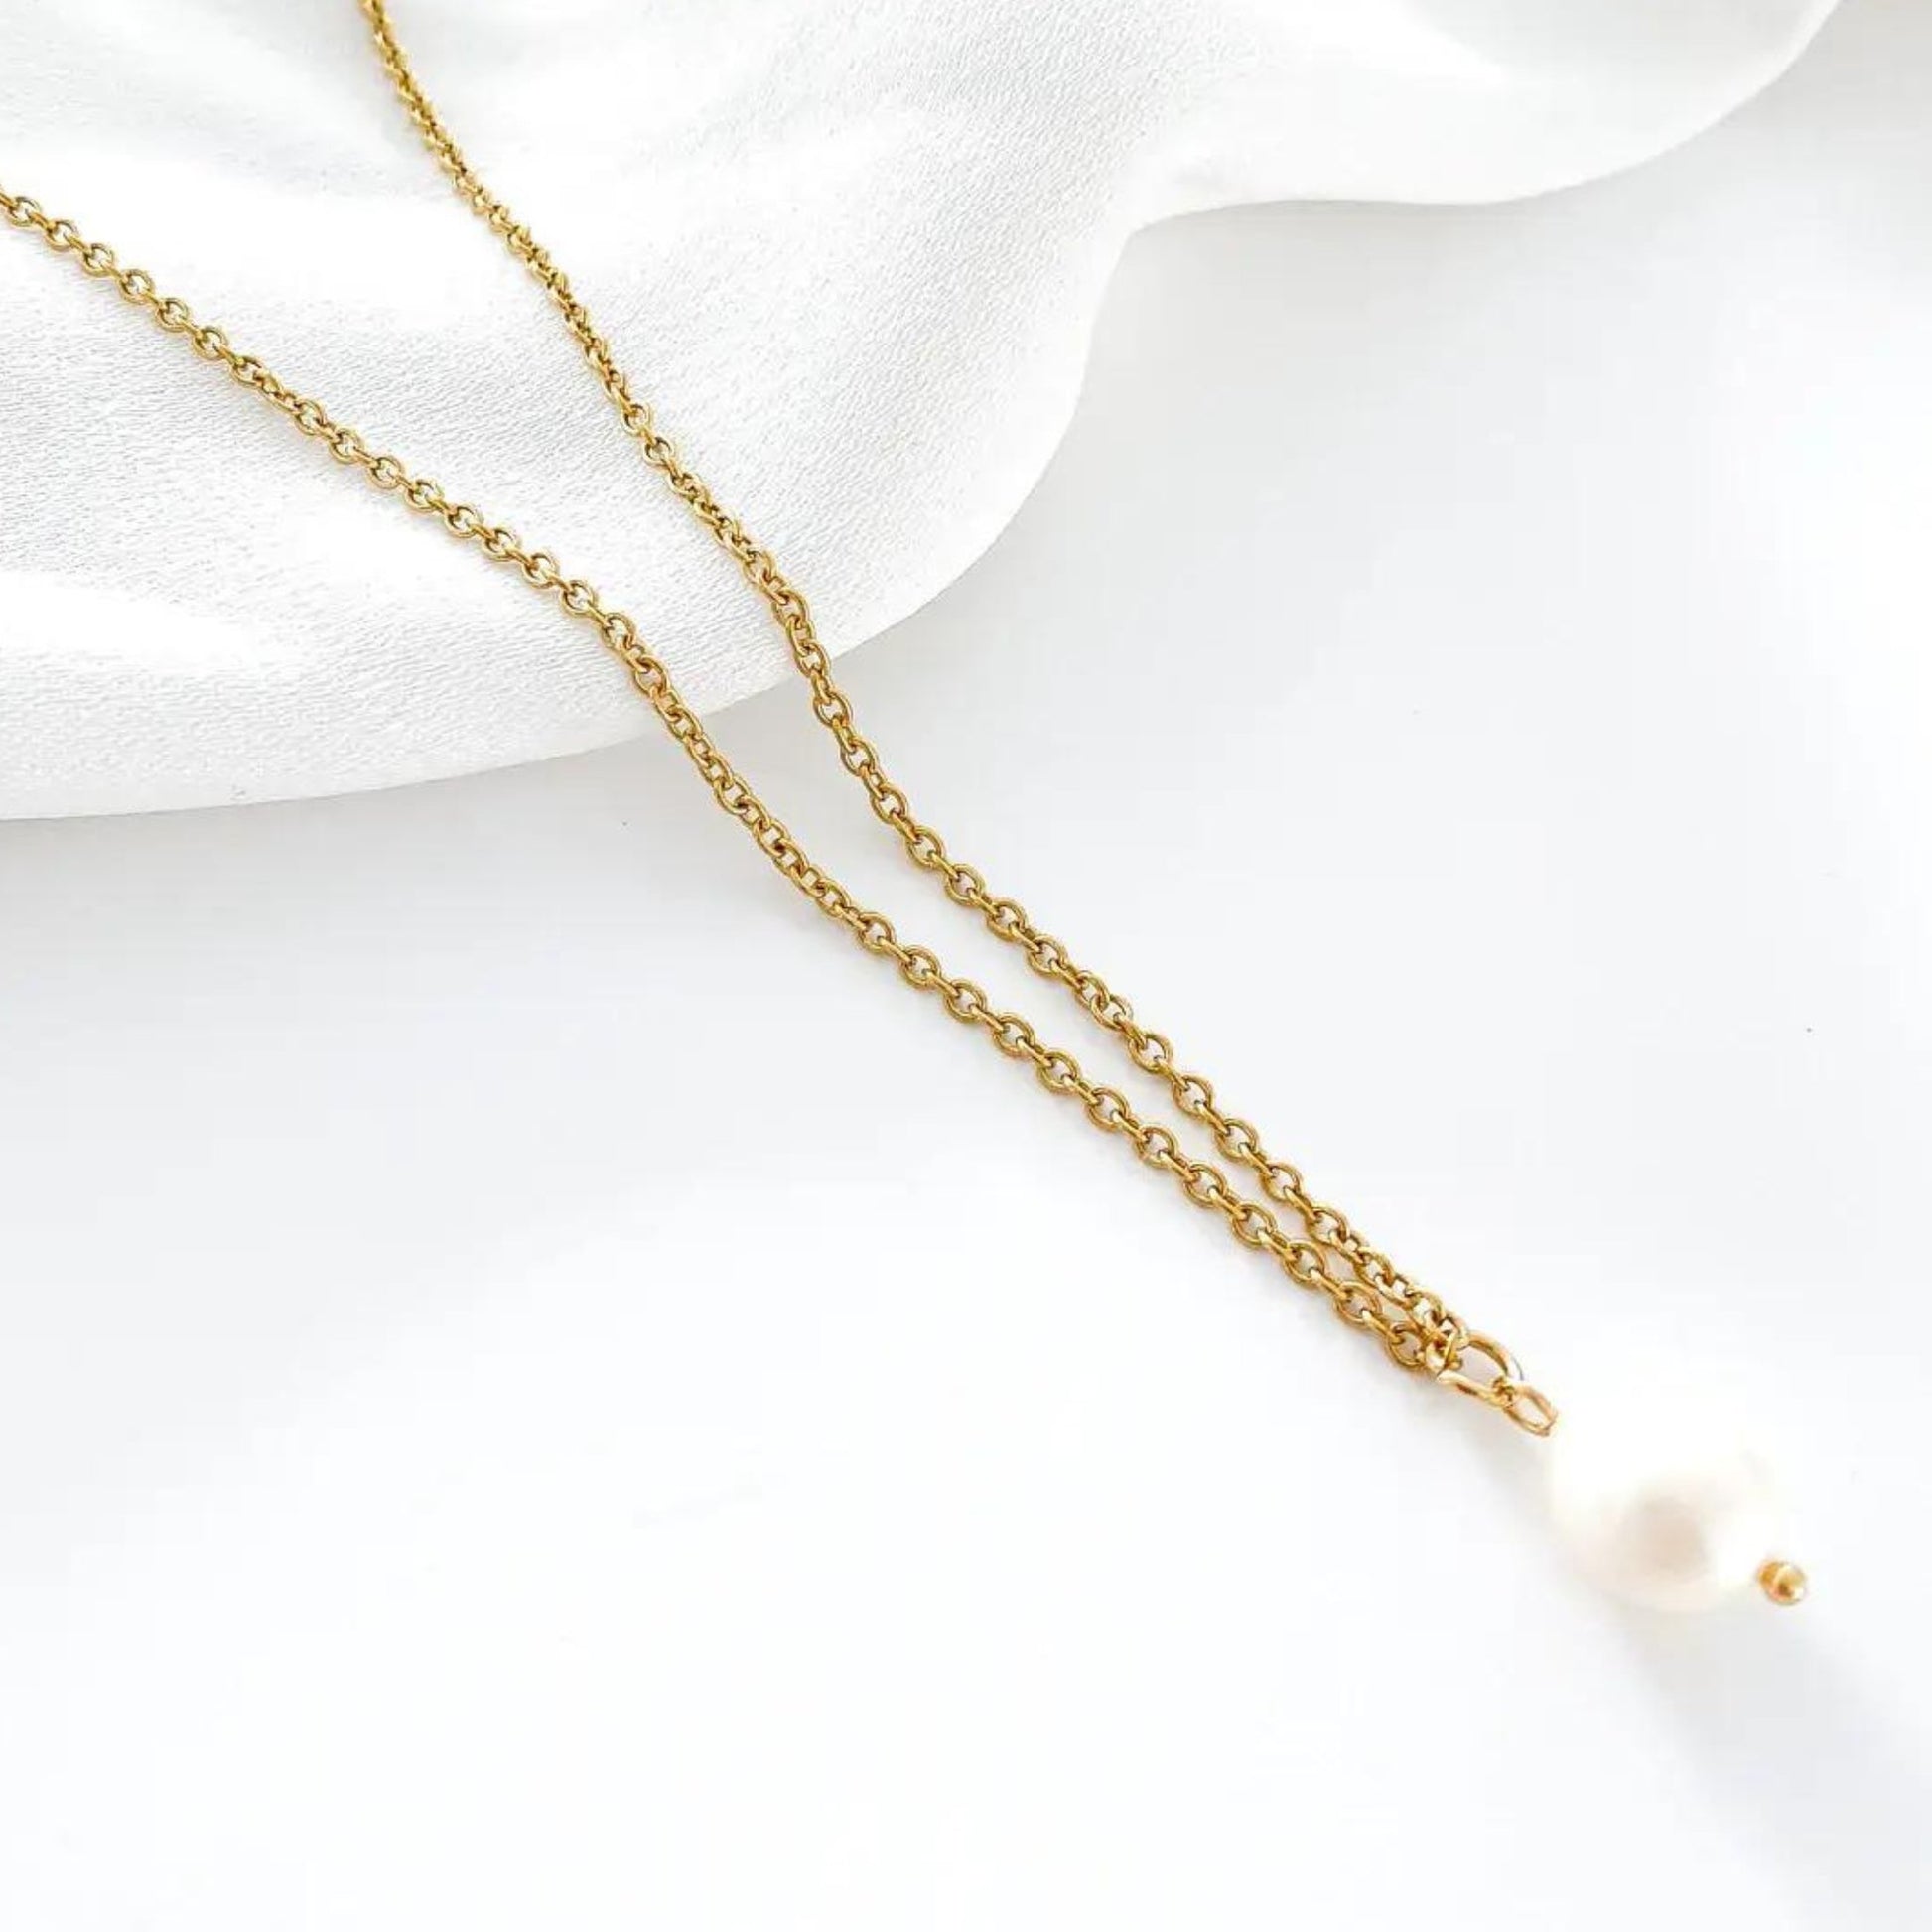 Delicate Pearl Drop Necklace Gold - The Little Jewellery Company